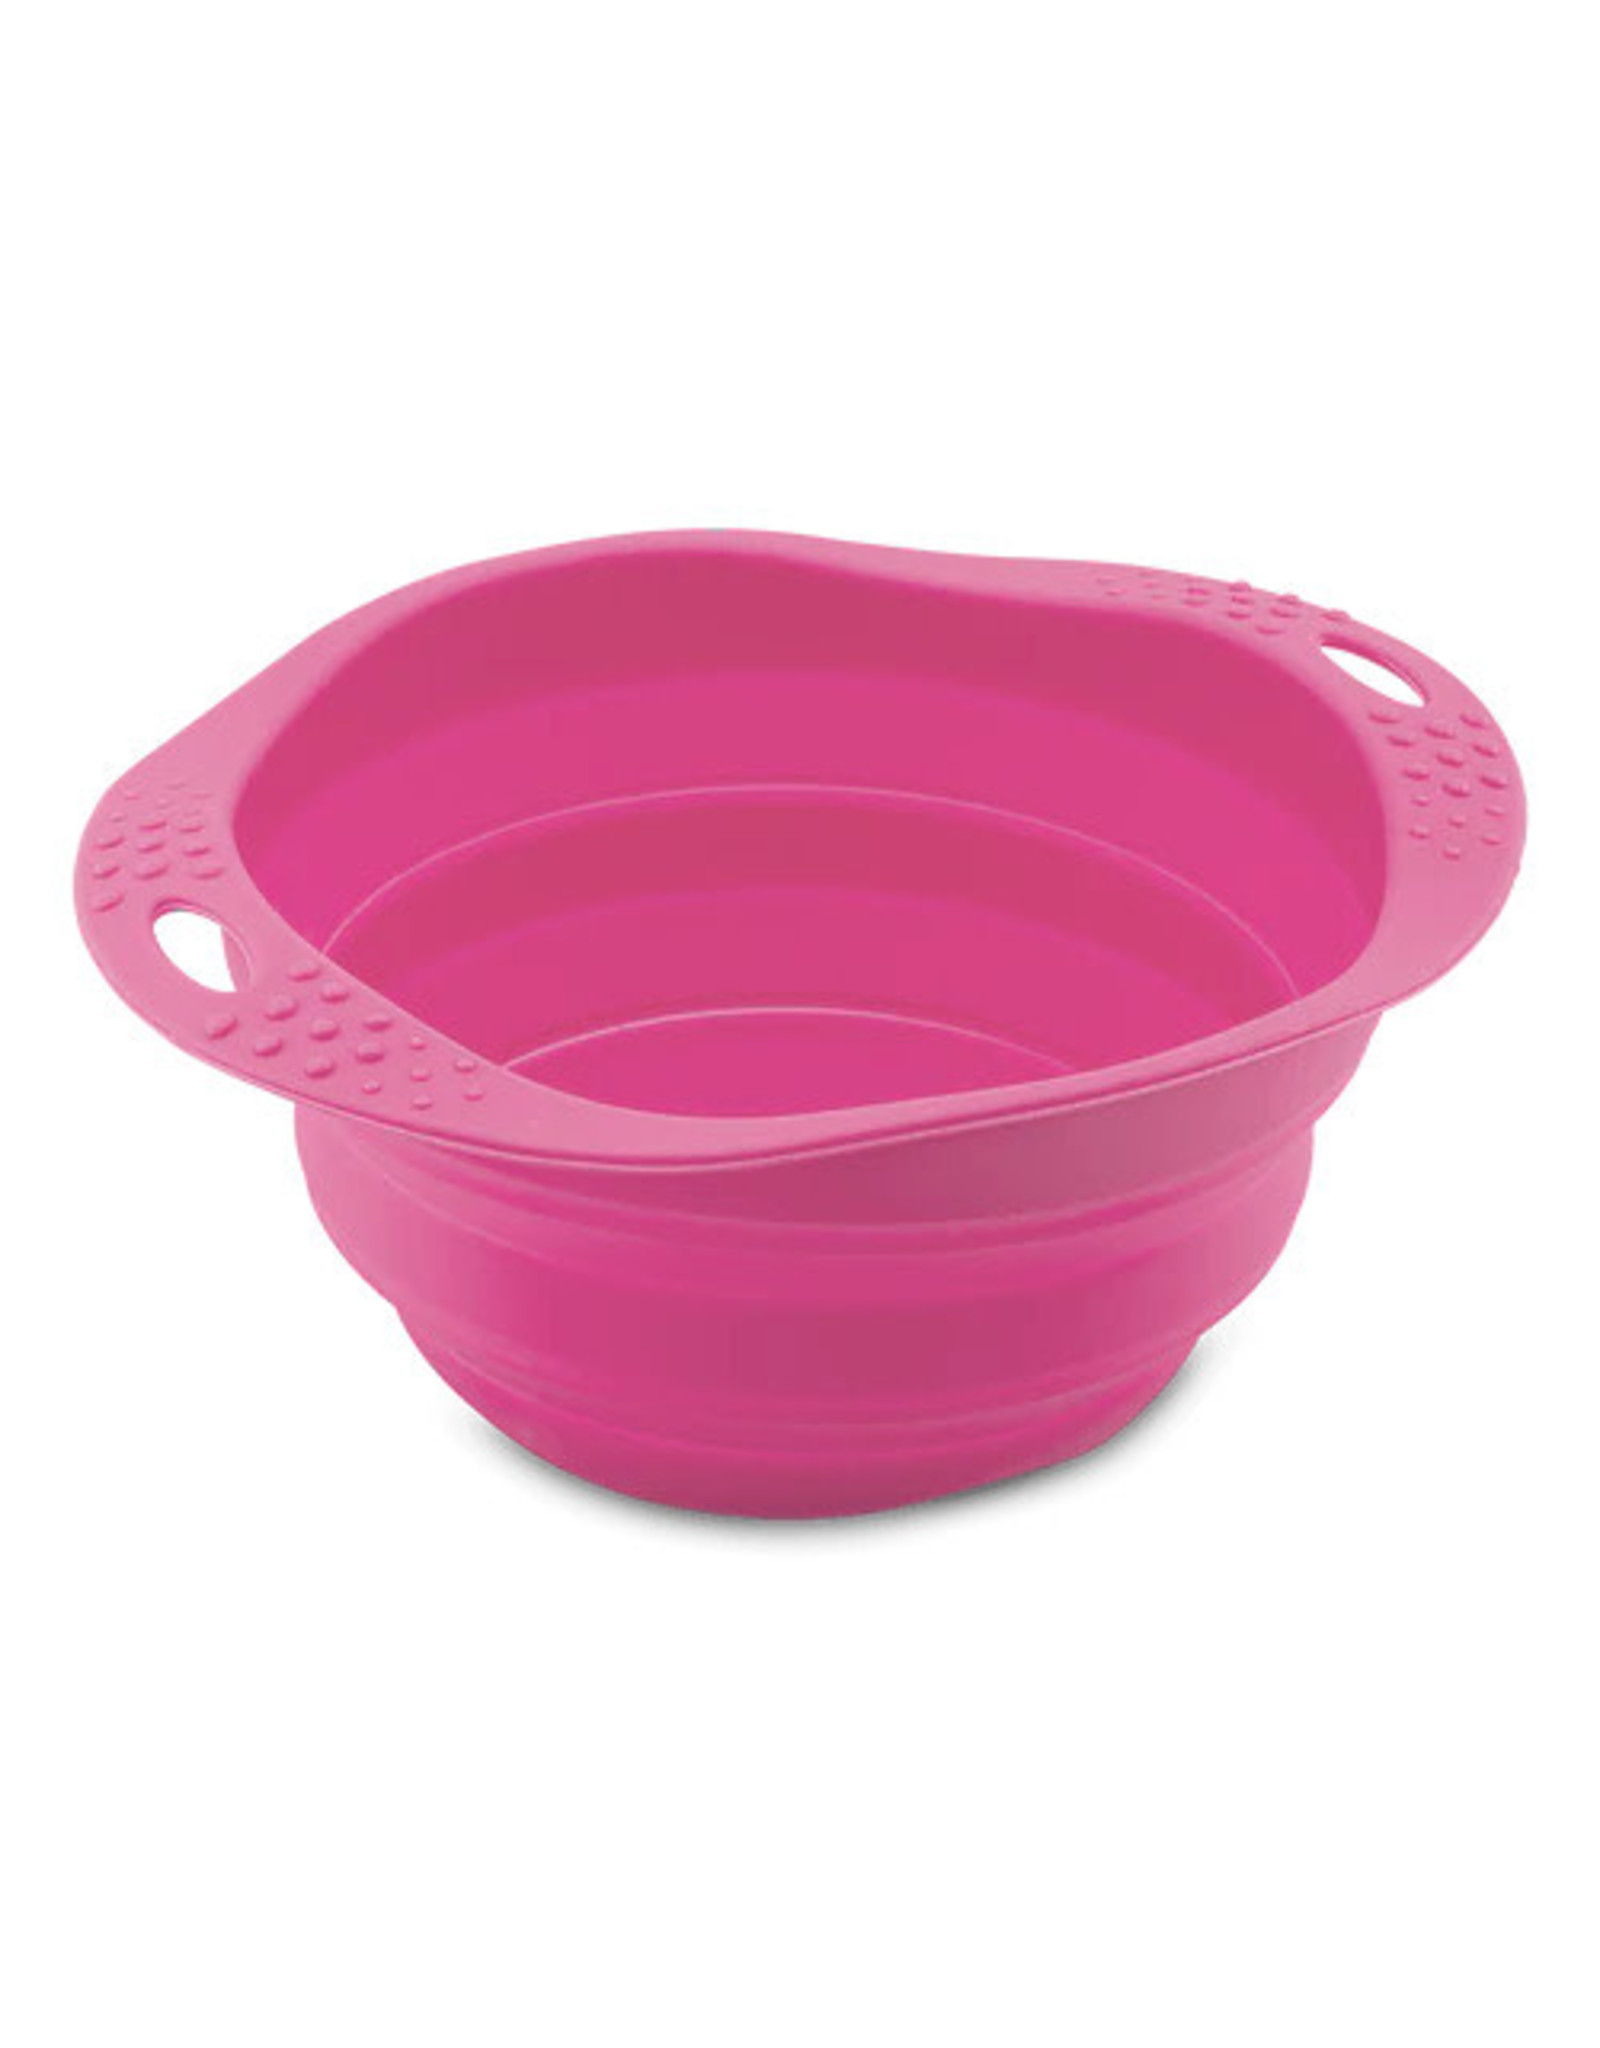 BECO PETS Silicone Travel Bowl Blue 0.38L